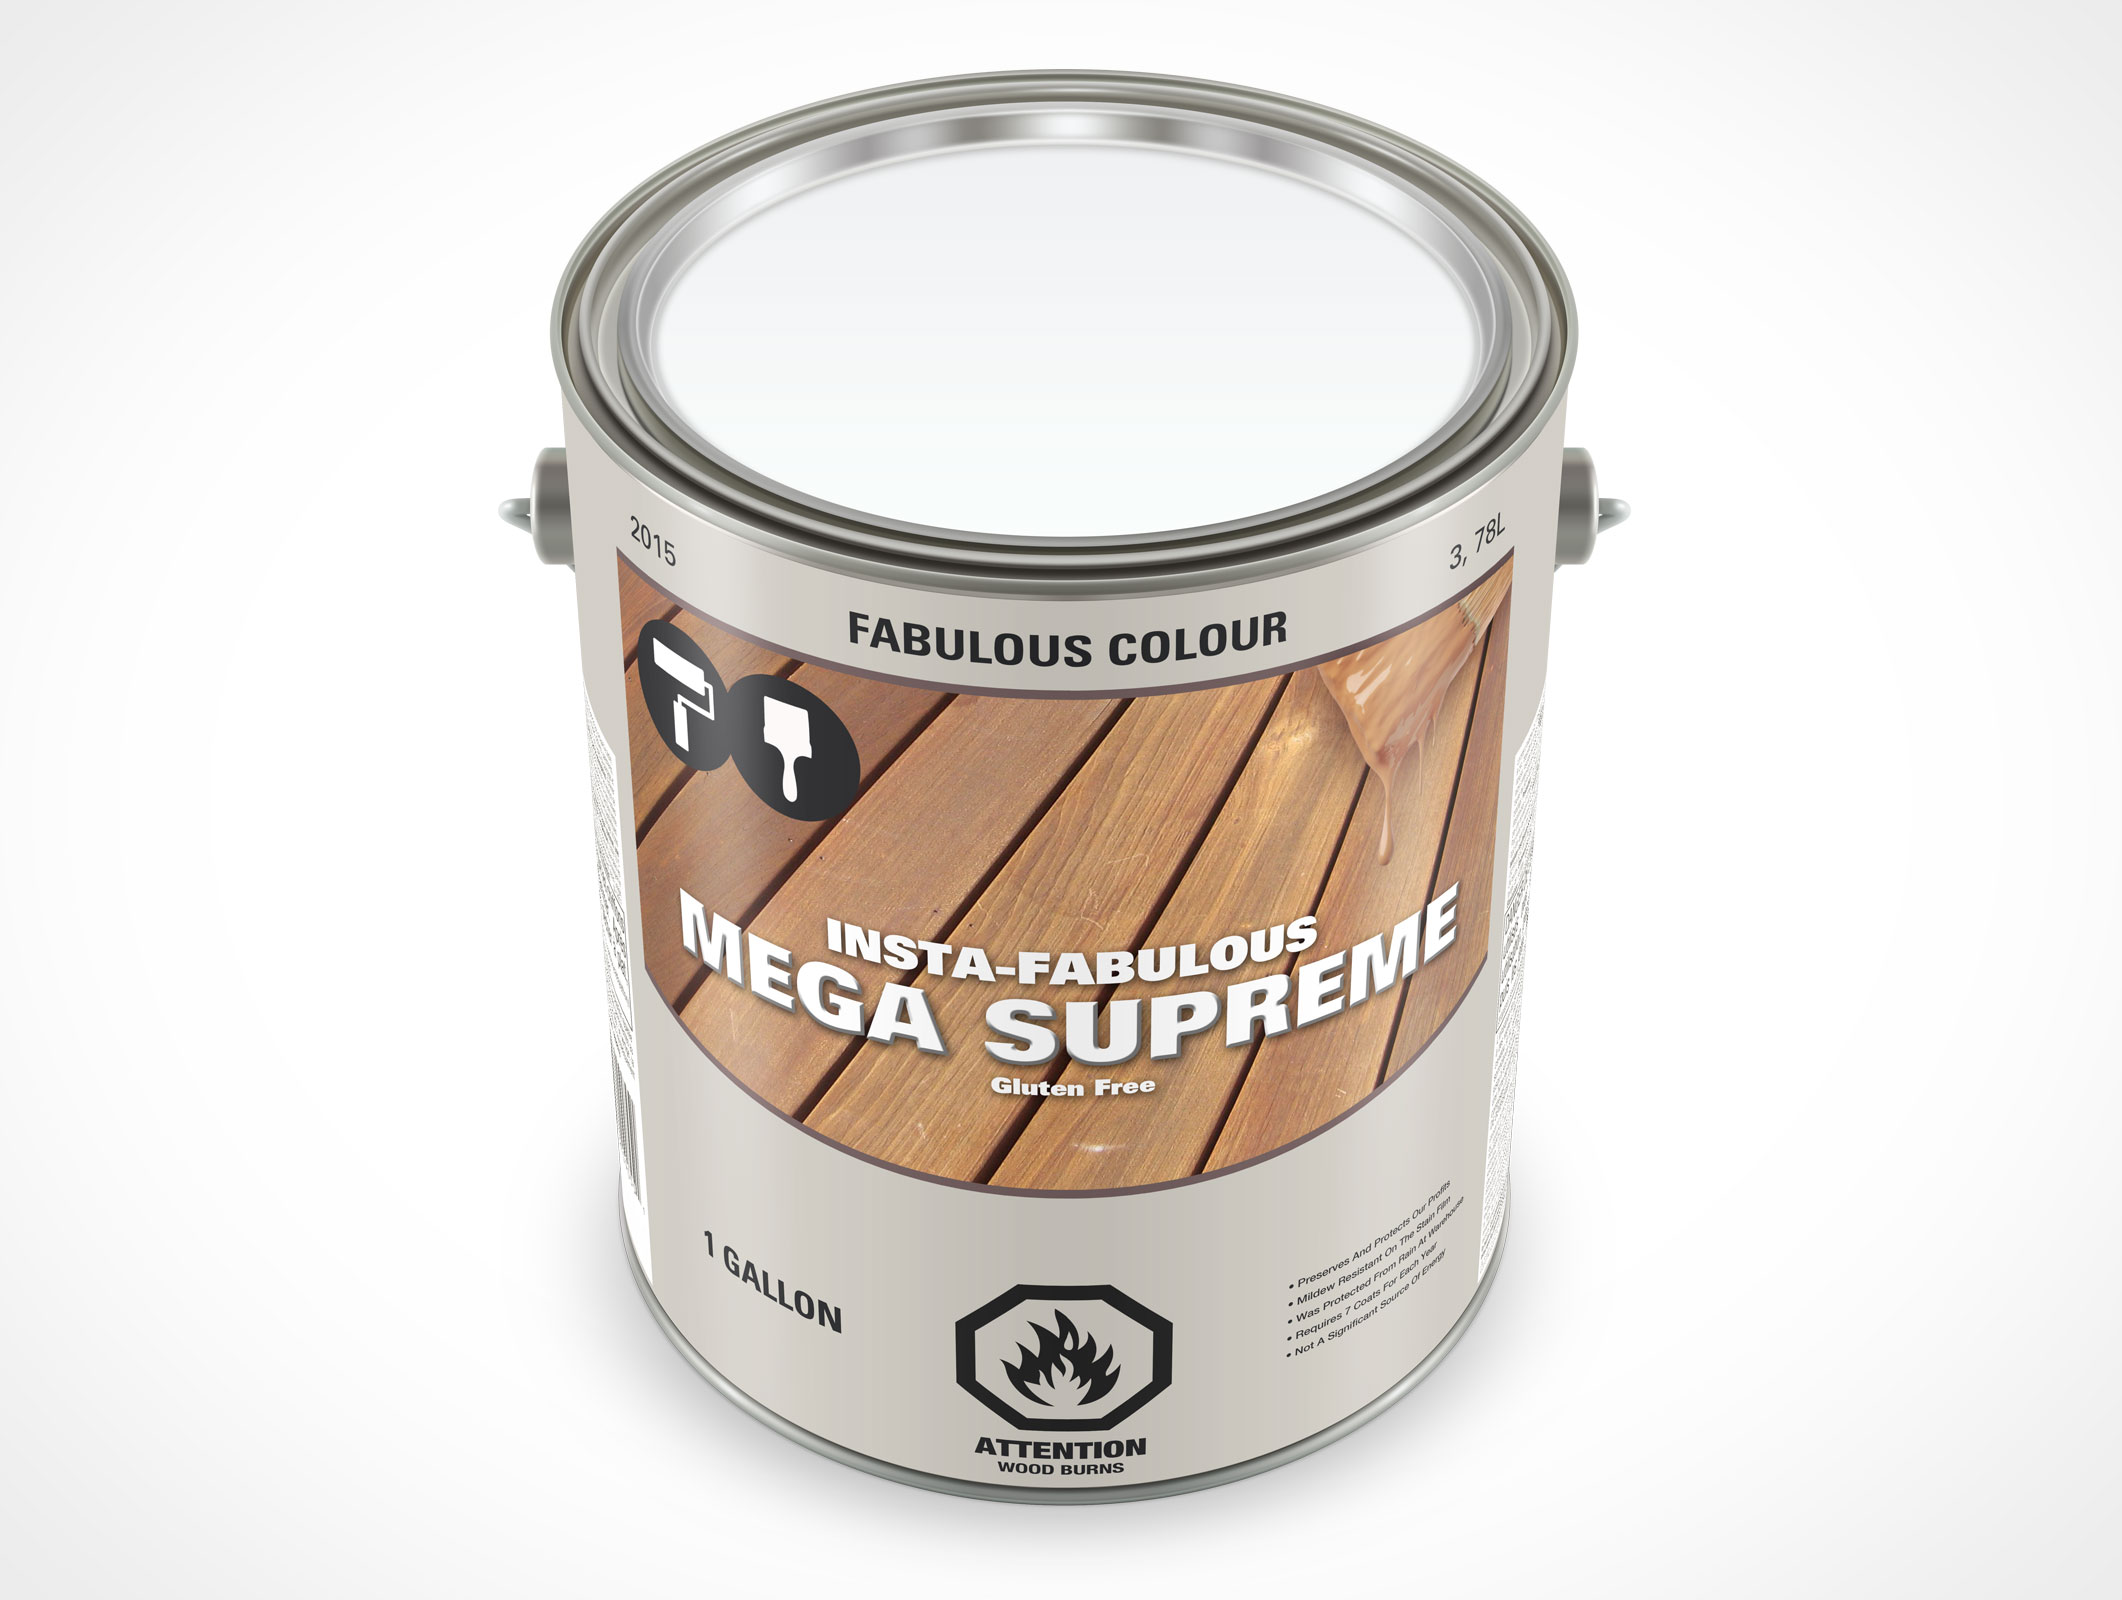 1 Gallon Paint Can Mockup 24r5